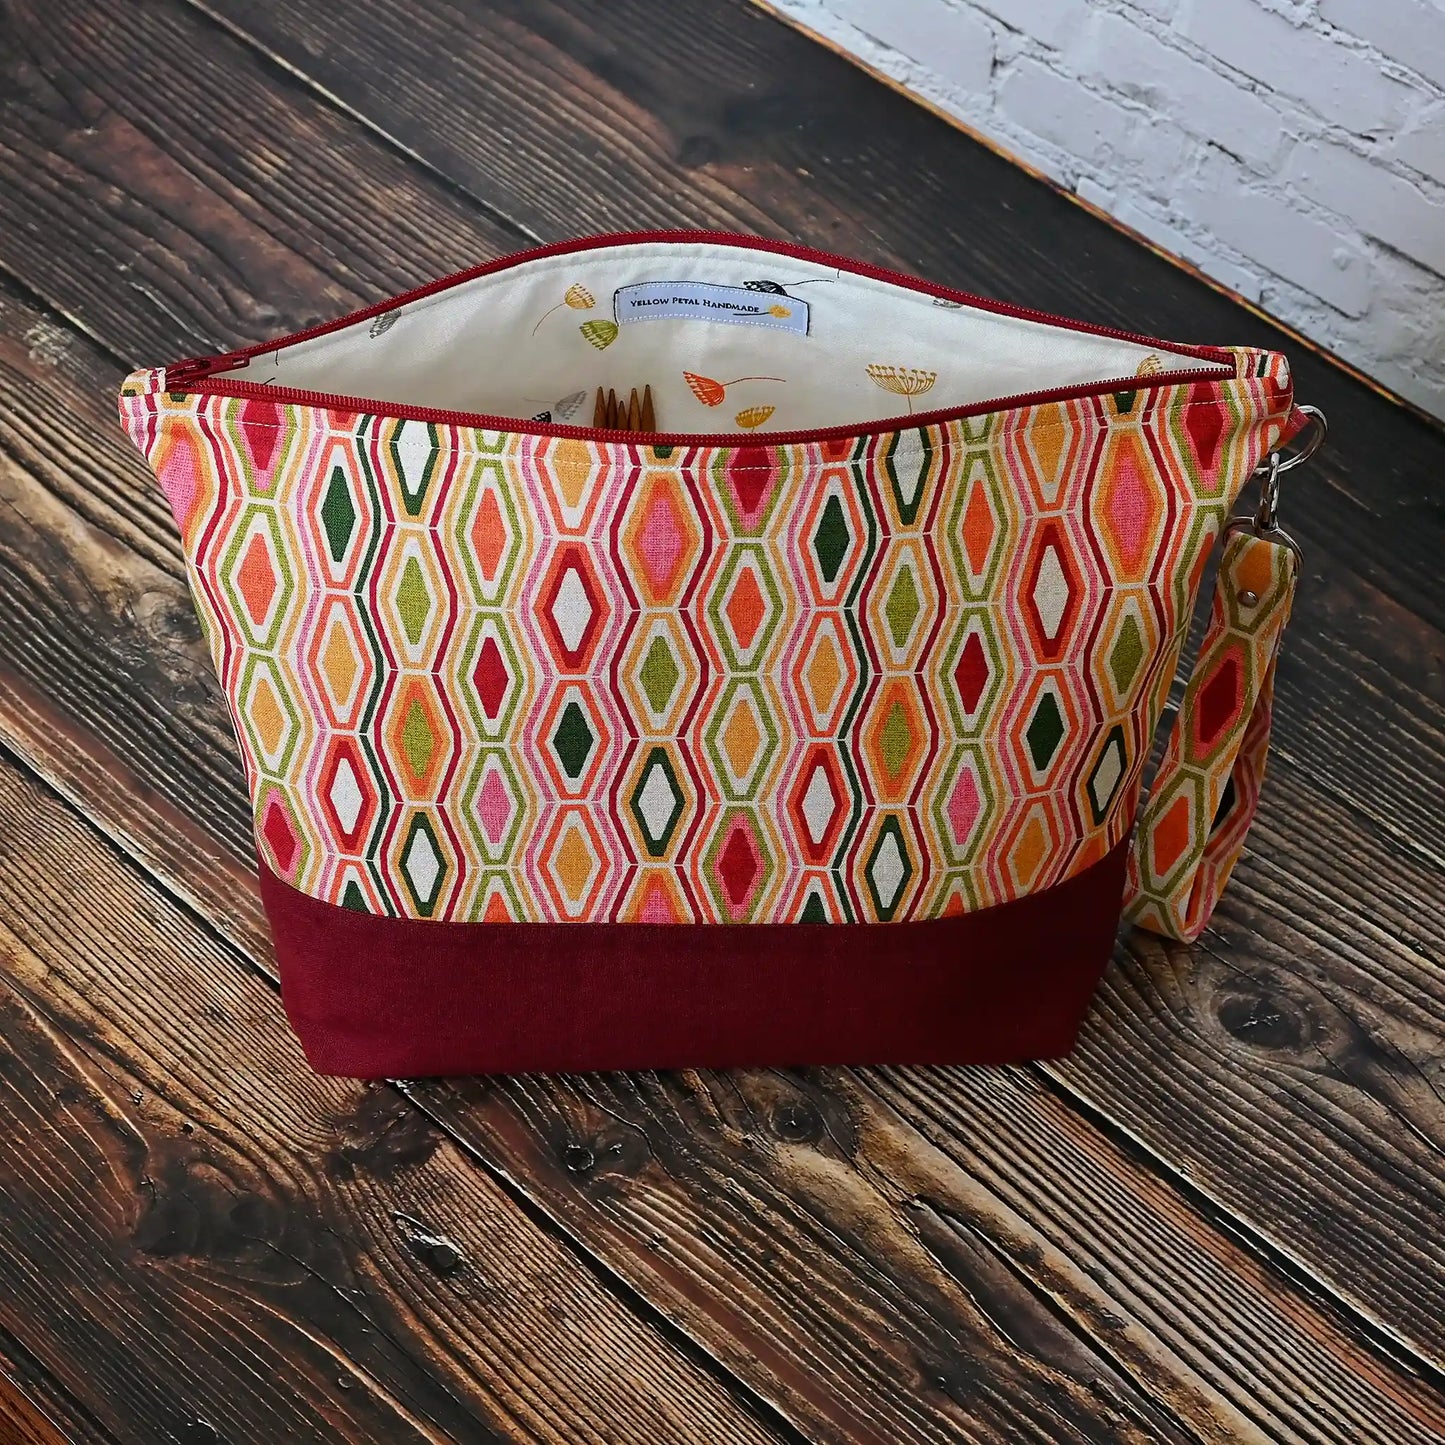 Gorgeous Jewel toned project bag with wrist strap and pockets.  Made in Canada by Yellow Petal Handmade.